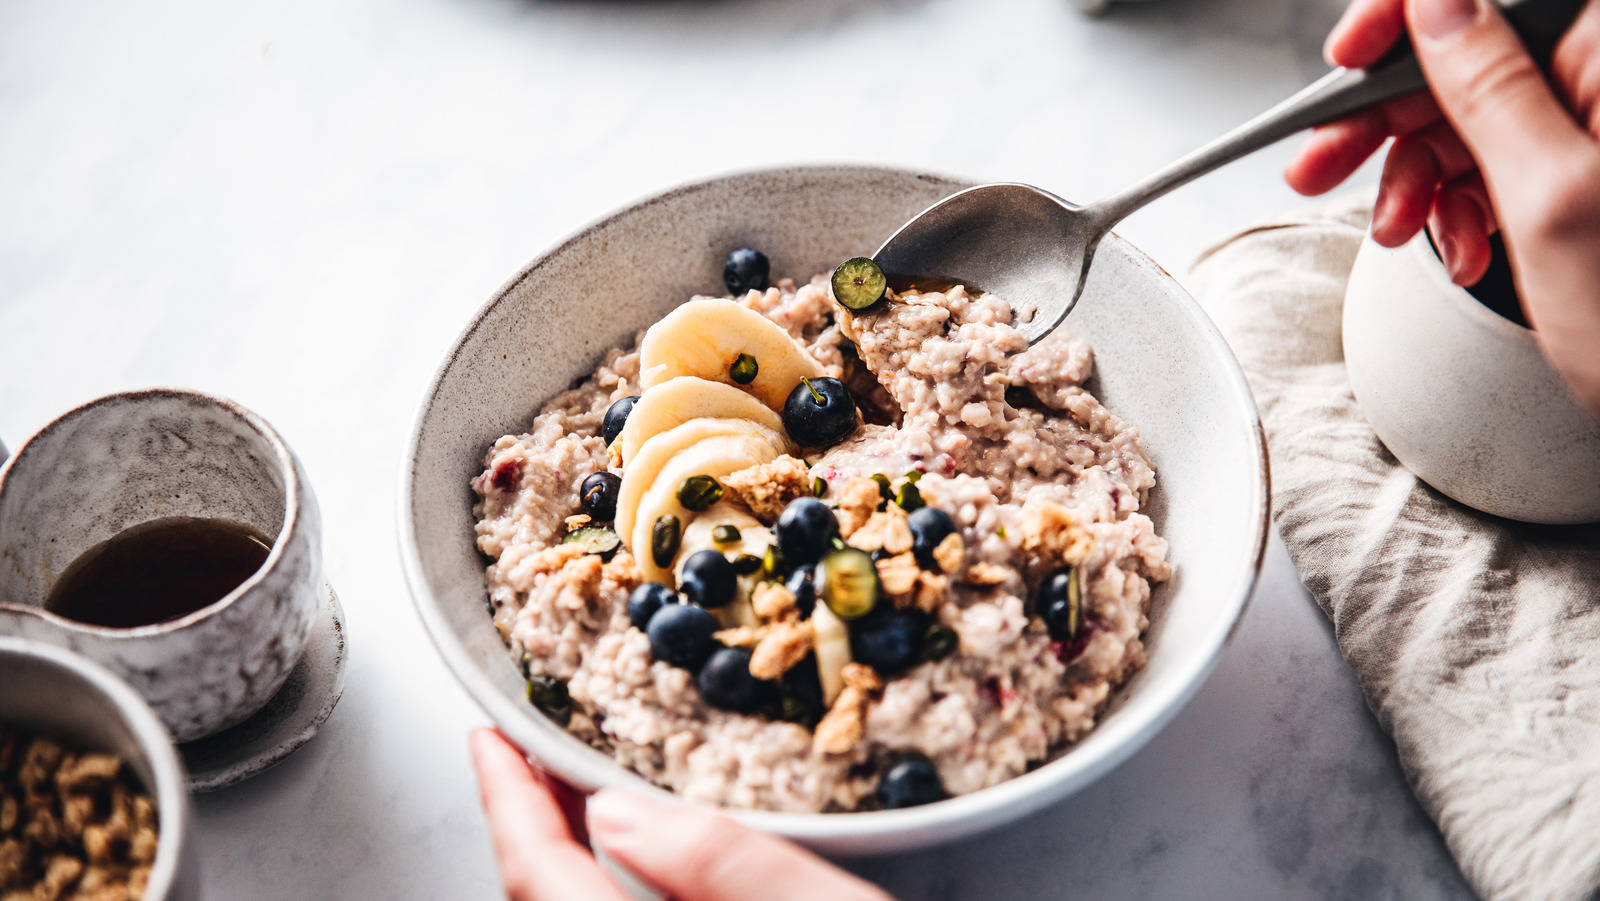 For The Creamiest Oatmeal, Break Out Your Rice Cooker - Daily Meal